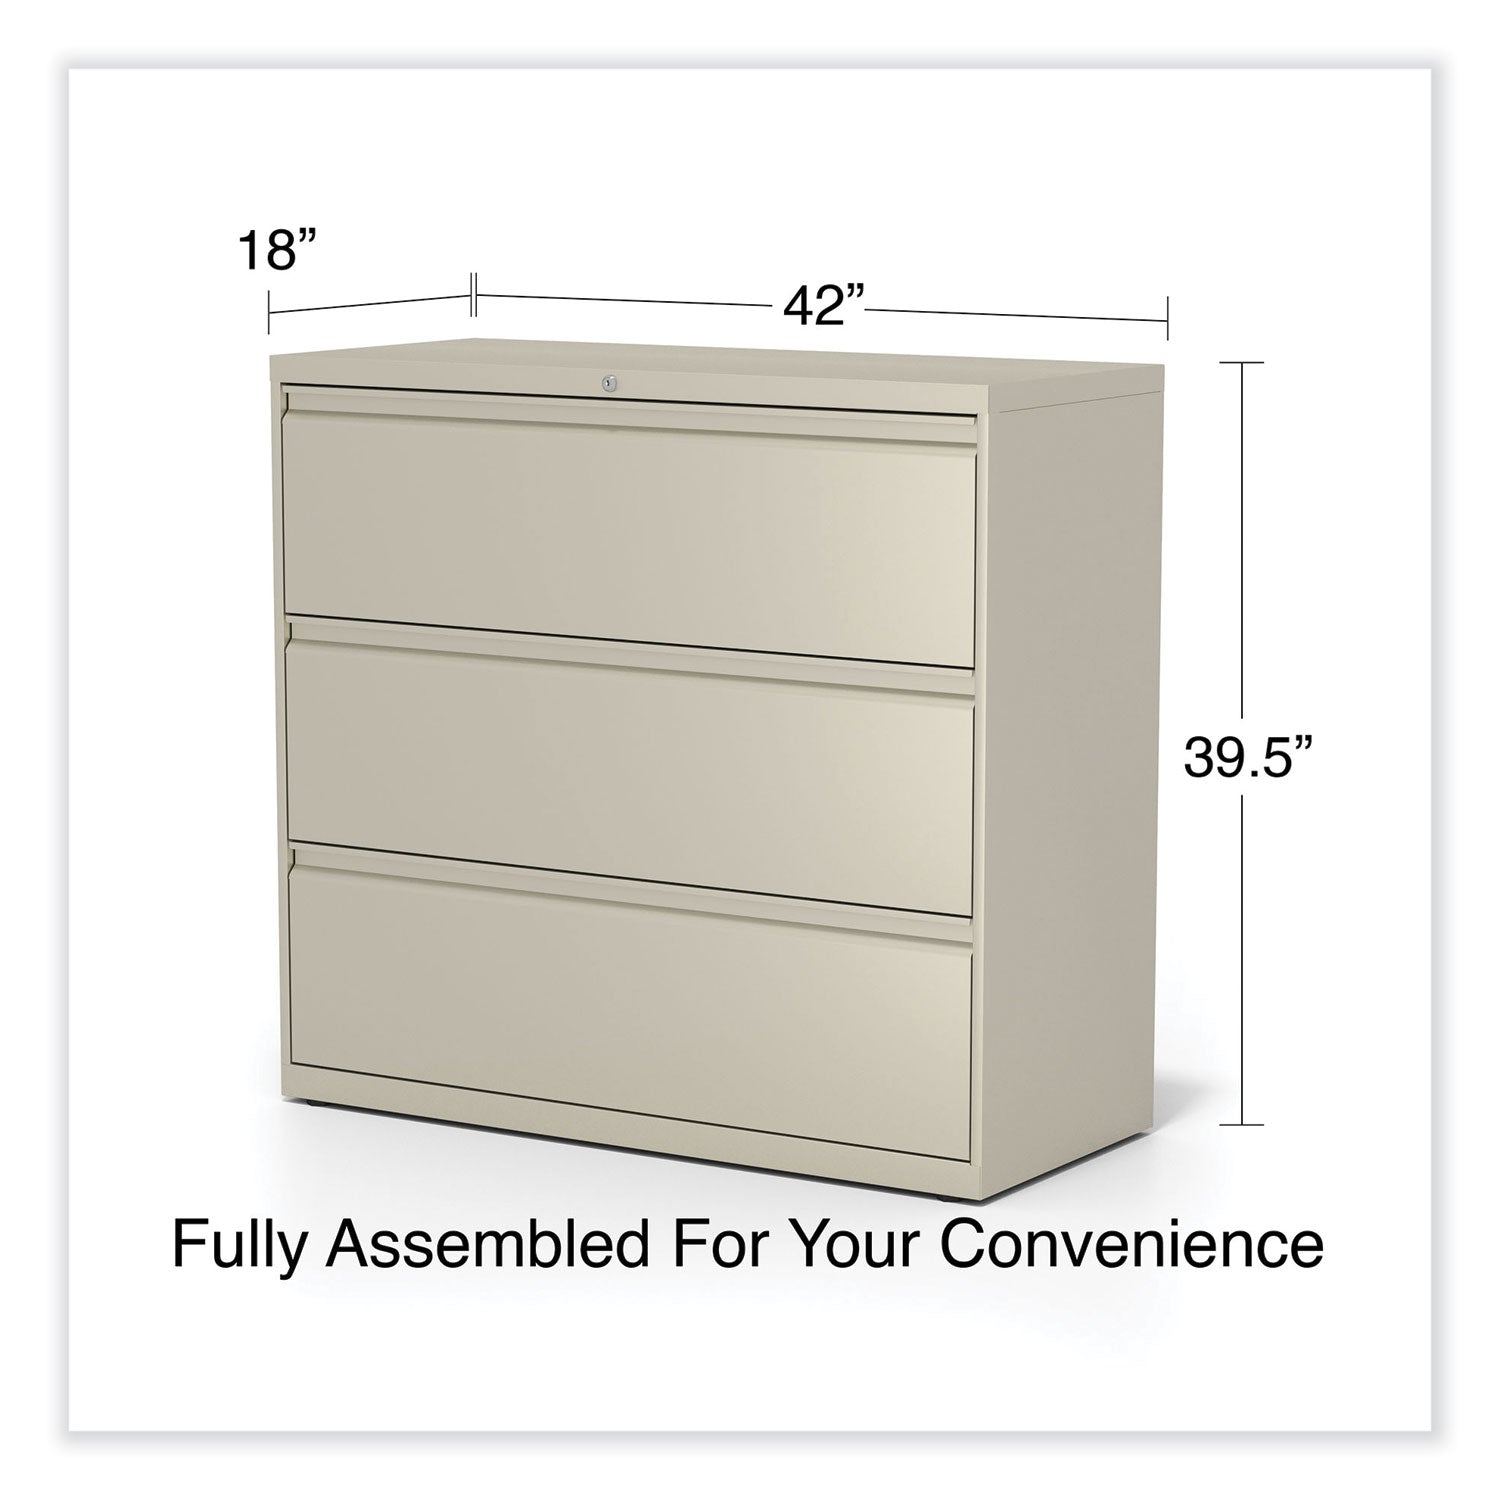 lateral-file-3-legal-letter-a4-a5-size-file-drawers-putty-42-x-1863-x-4025_alehlf4241py - 6